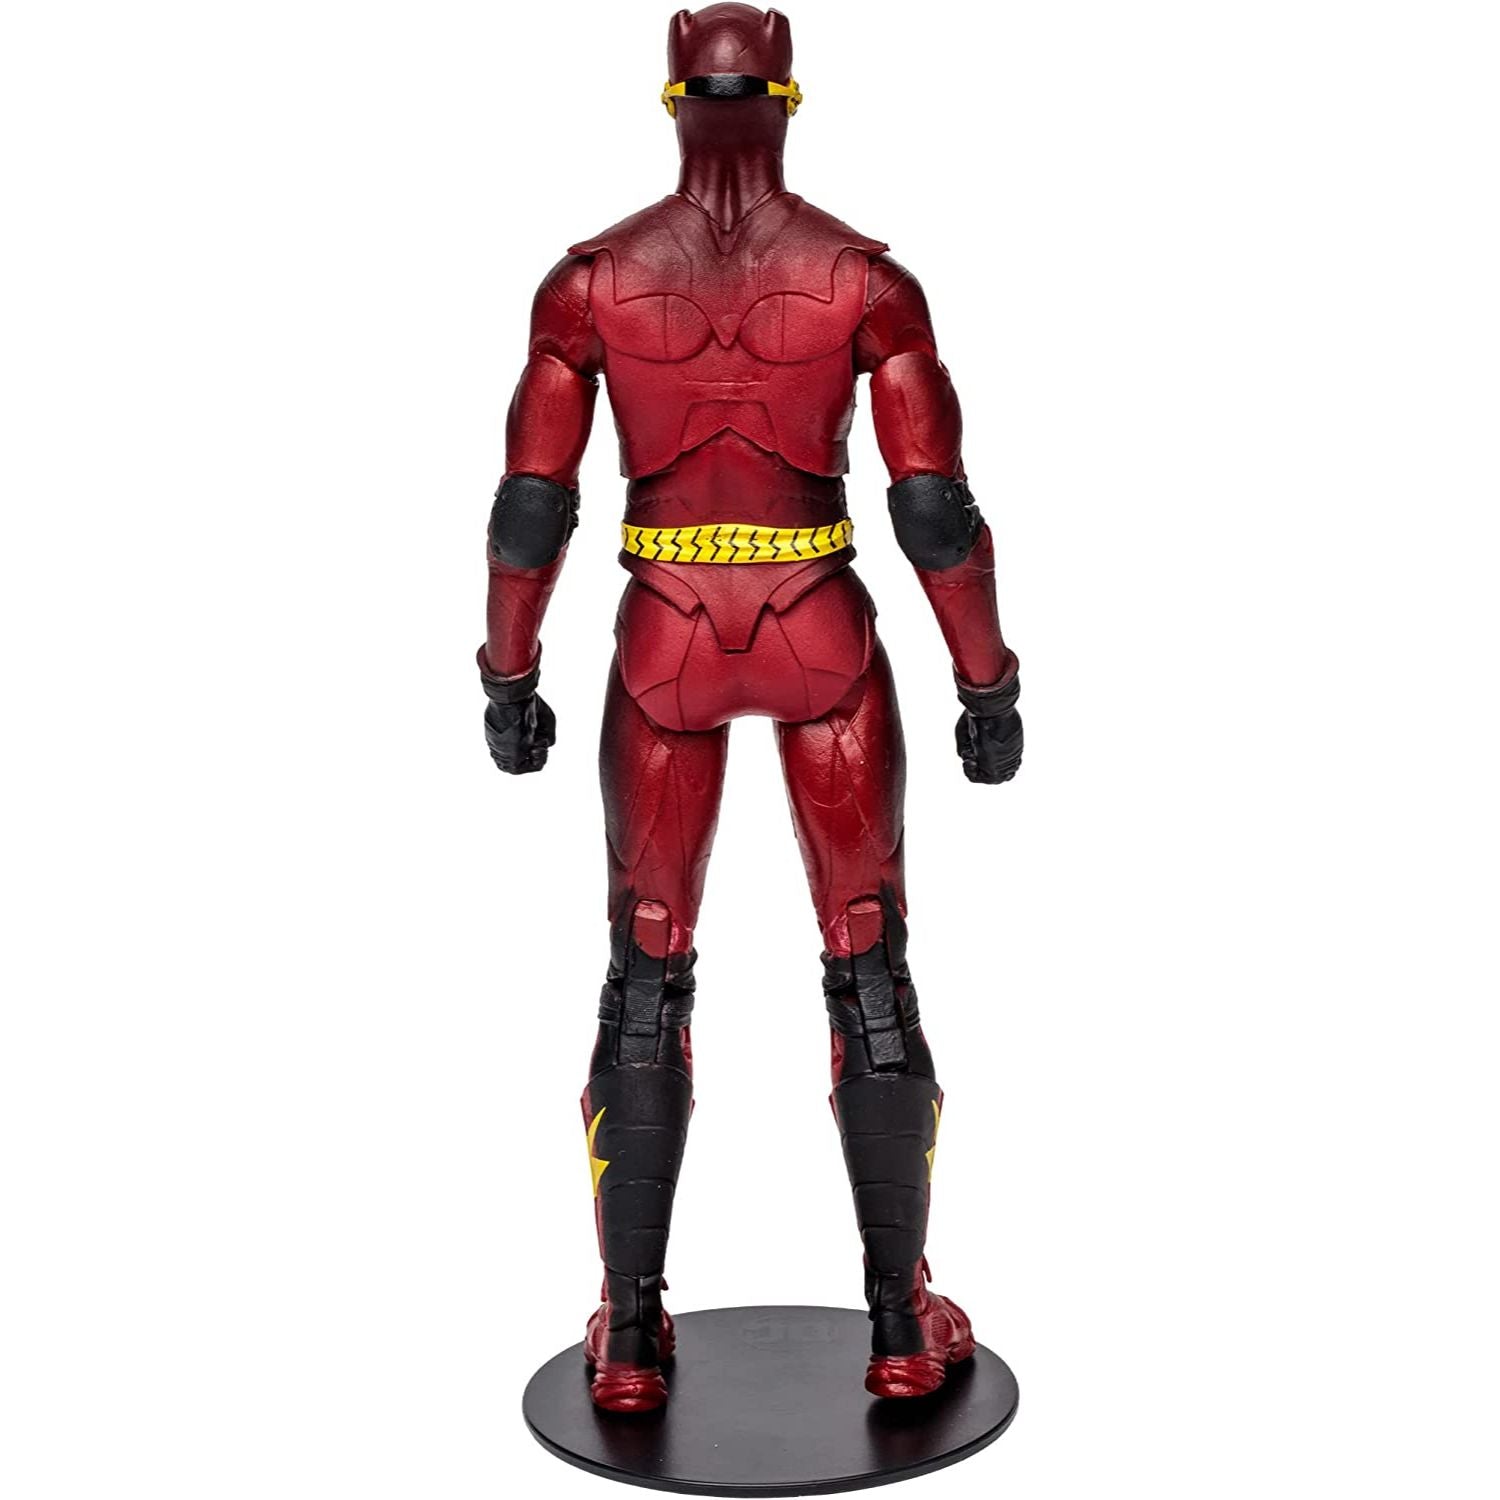 DC Multiverse - The Flash Movie - The Flash Action Figure Toys